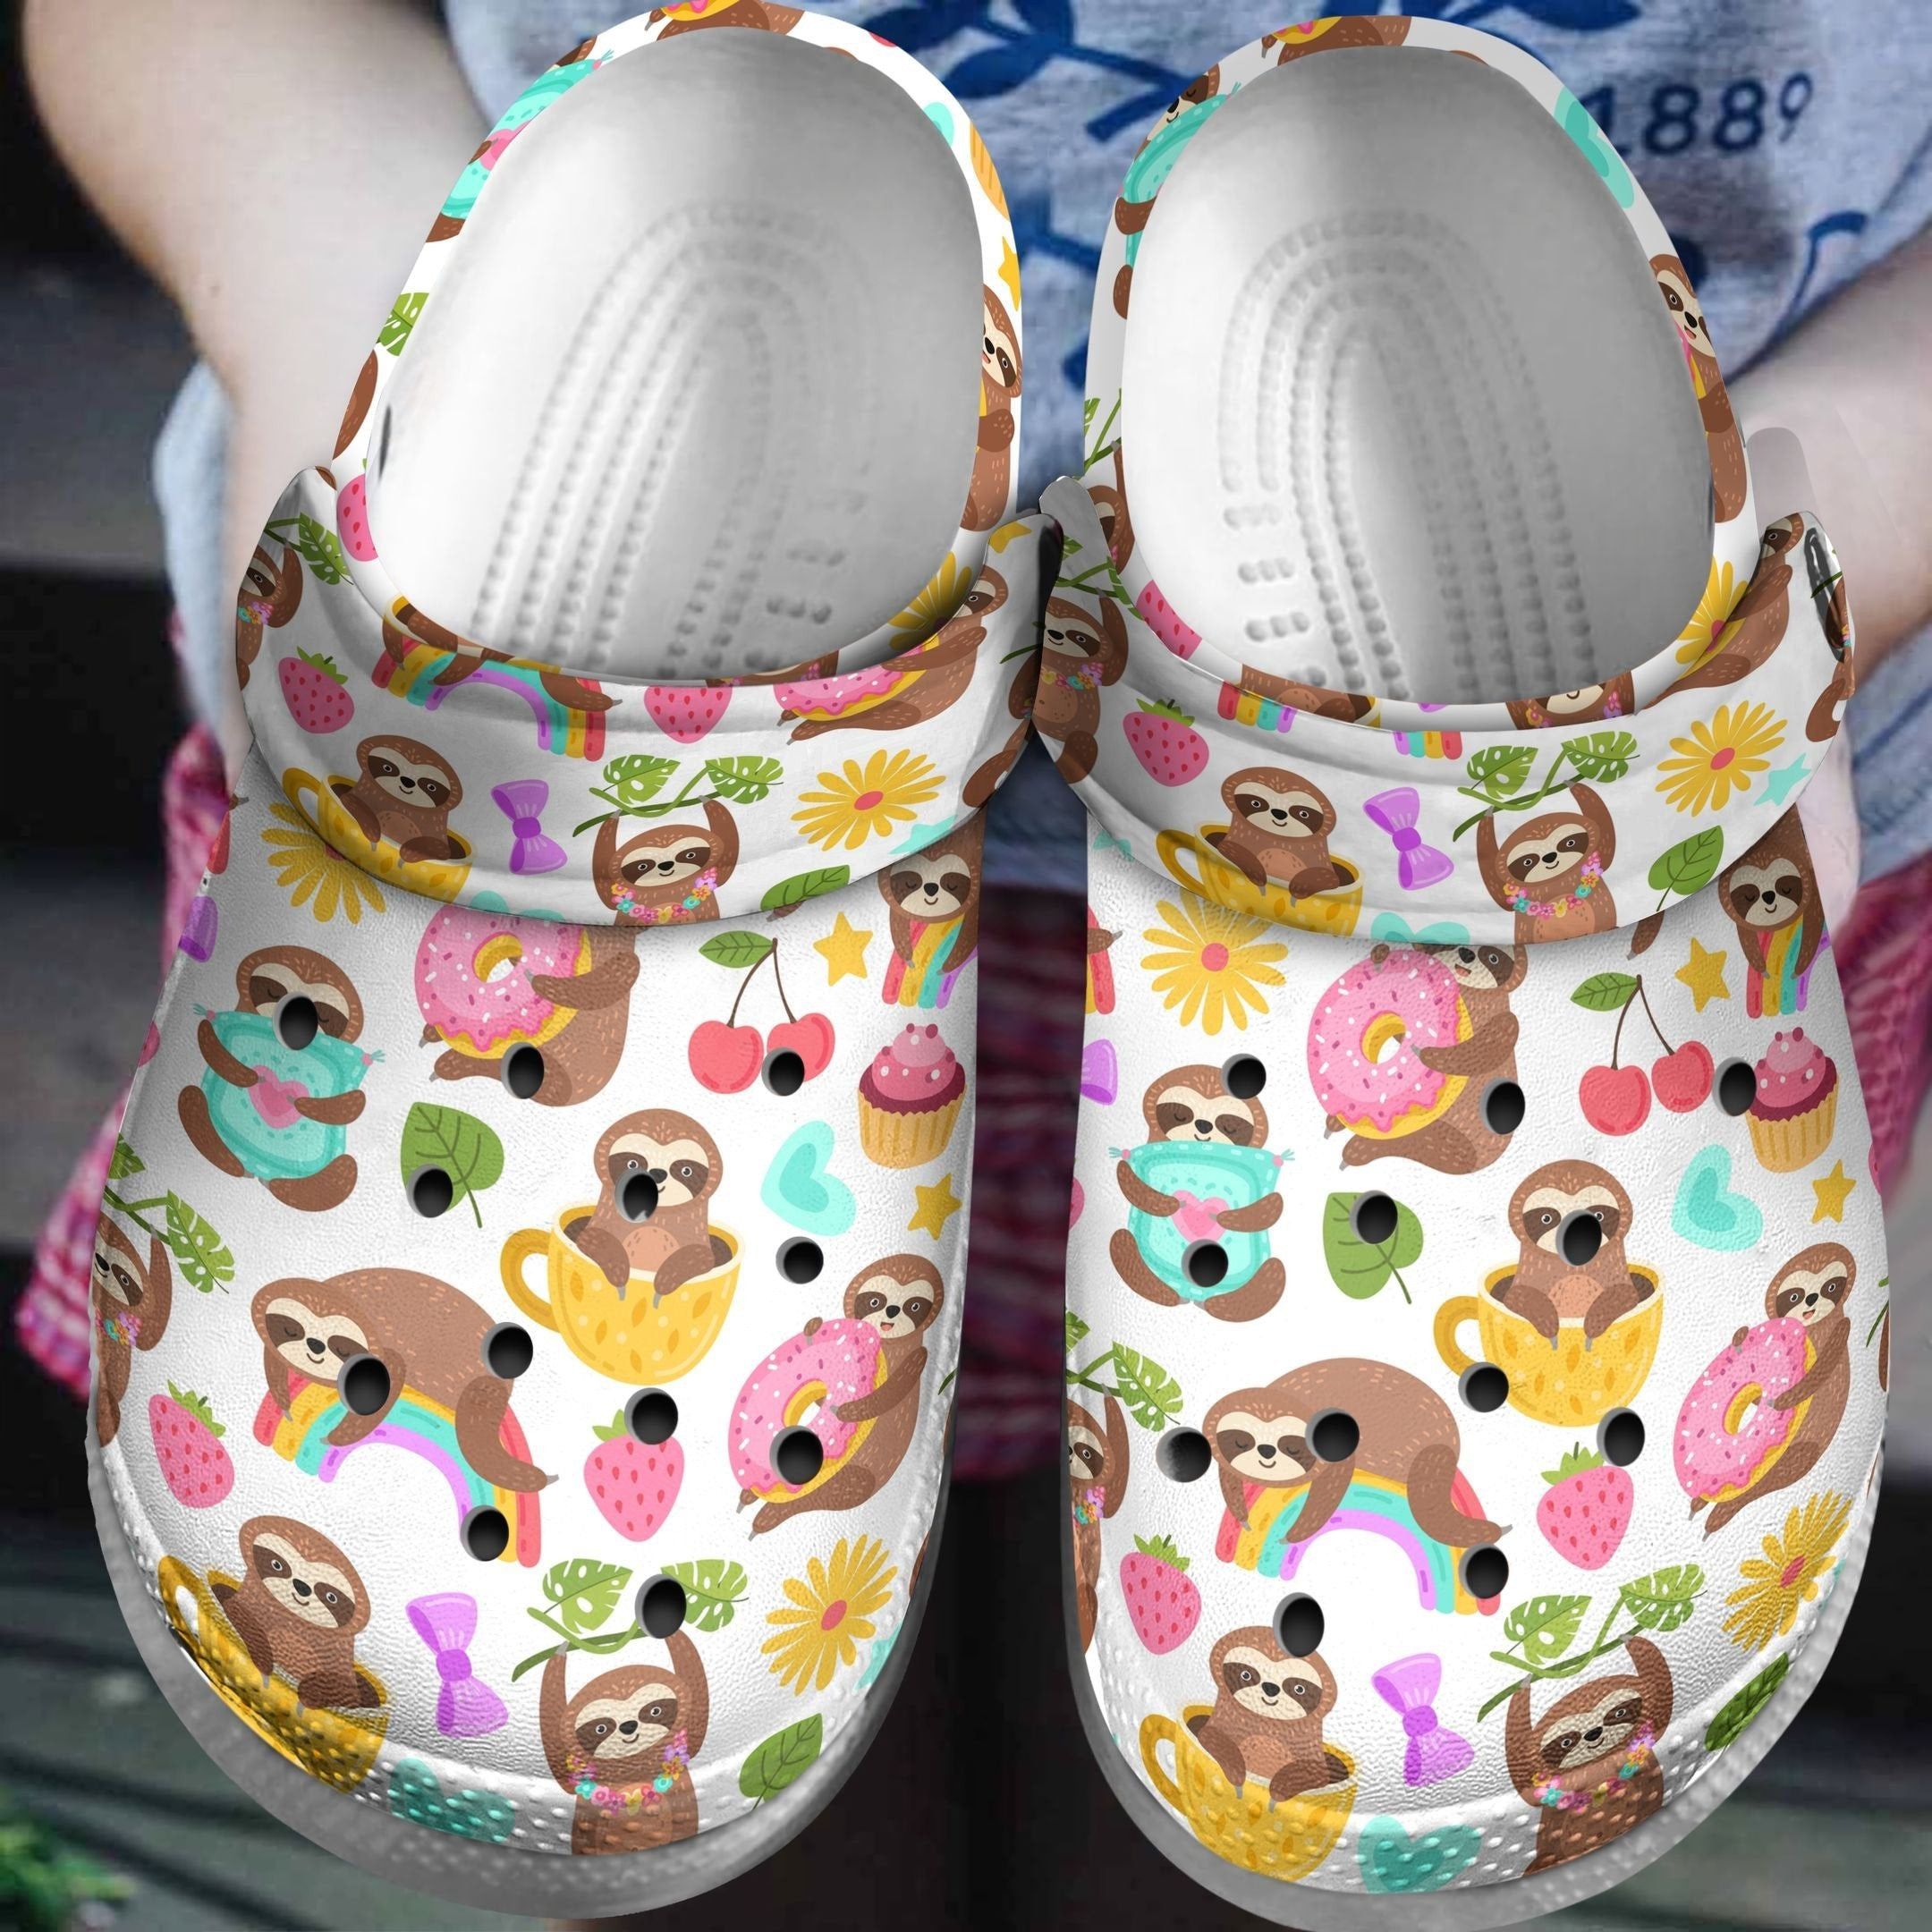 Cute Sloth Hang In From The Donut Art Shoes Crocbland Clog Gift For Girl